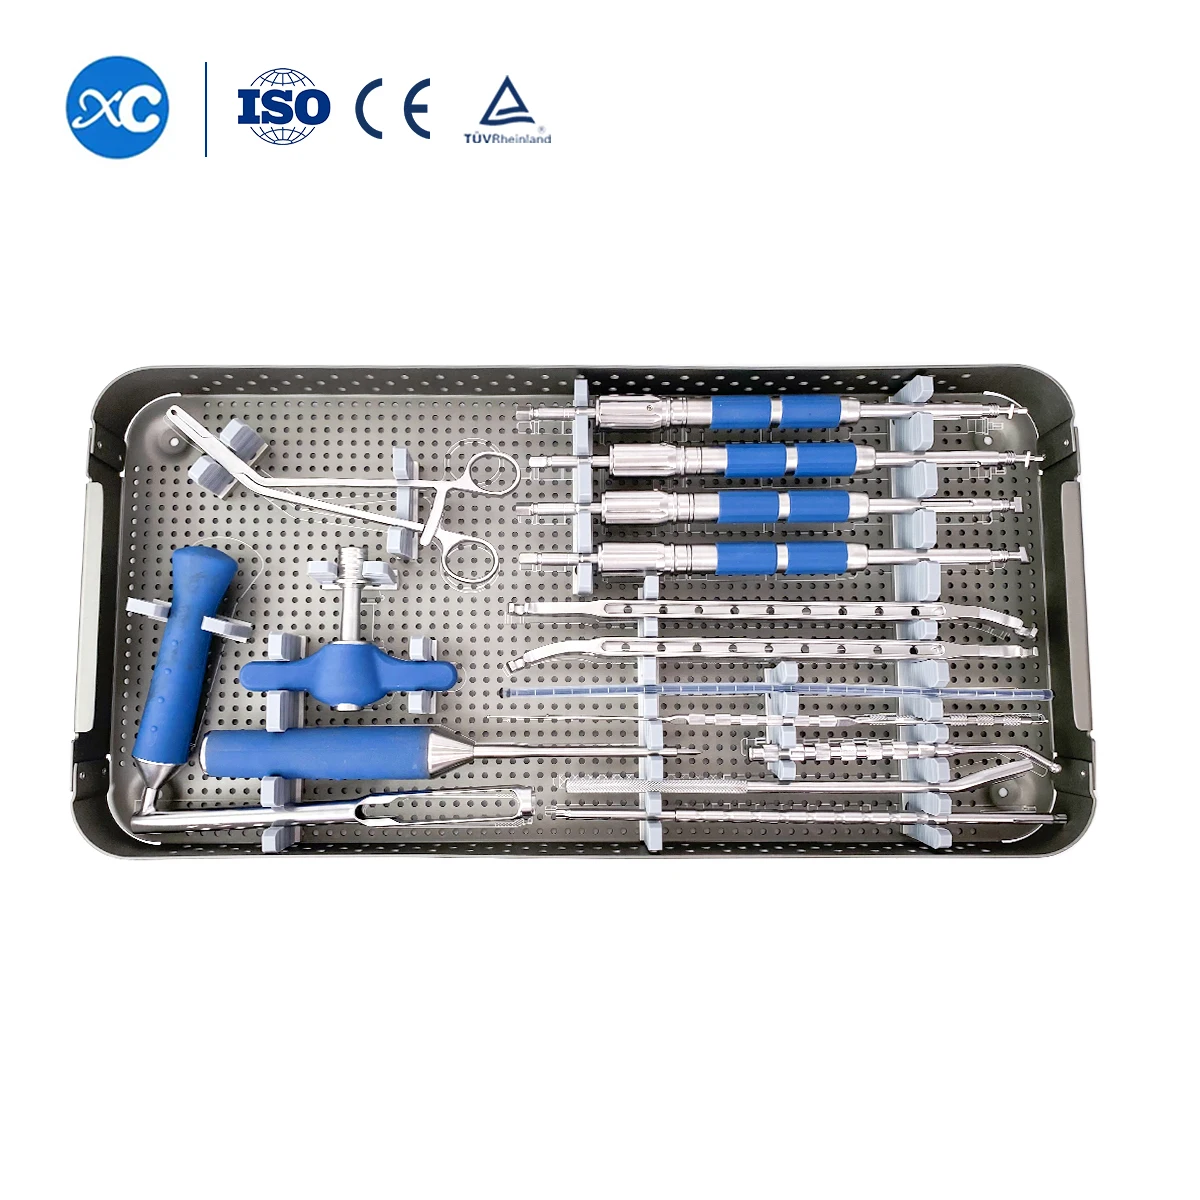 

5.5mm New Spinal Pedicle Screw System Instrument Set Orthopedic Surgical Spine Instruments Ortopedia For Medical Bone Surgery